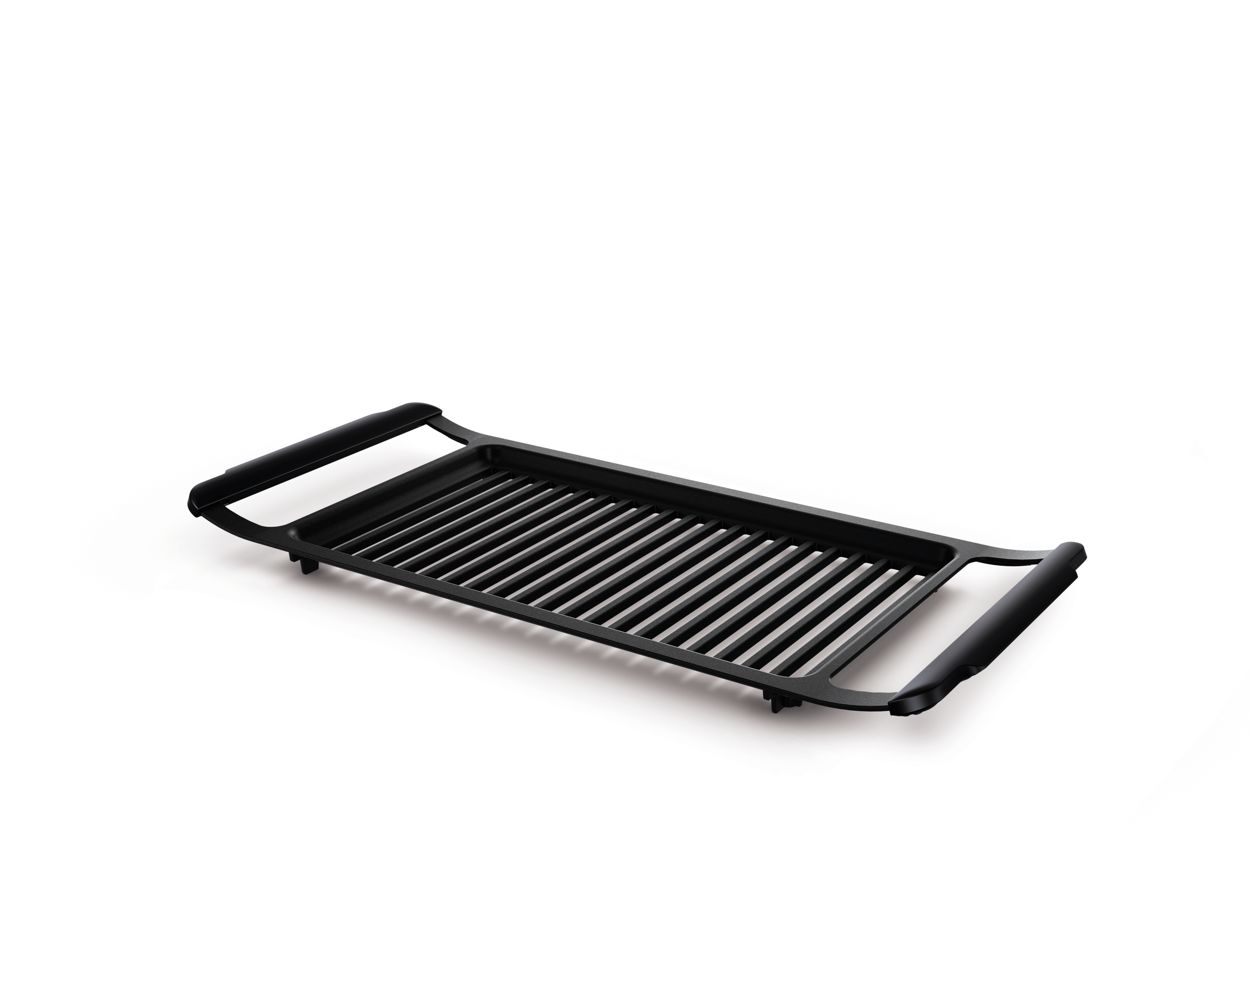 Philips Avance Indoor Smoke-Less Grill w/ Two Grill Grates, Black -  HD6372/94